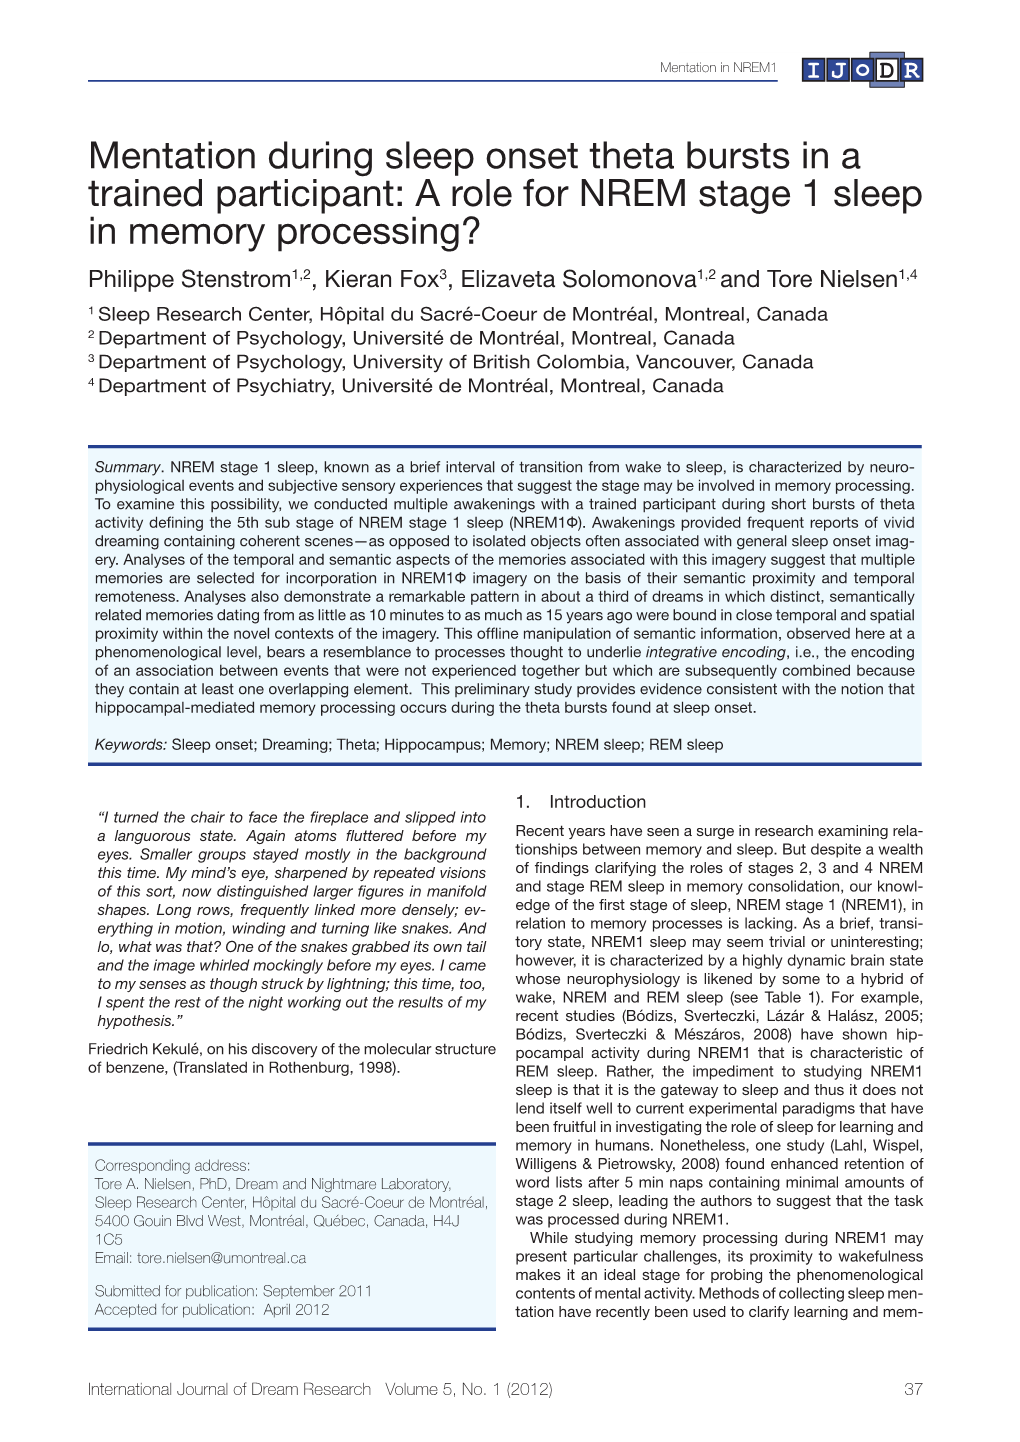 Mentation During Sleep Onset Theta Bursts in a Trained Participant: a Role for NREM Stage 1 Sleep in Memory Processing?